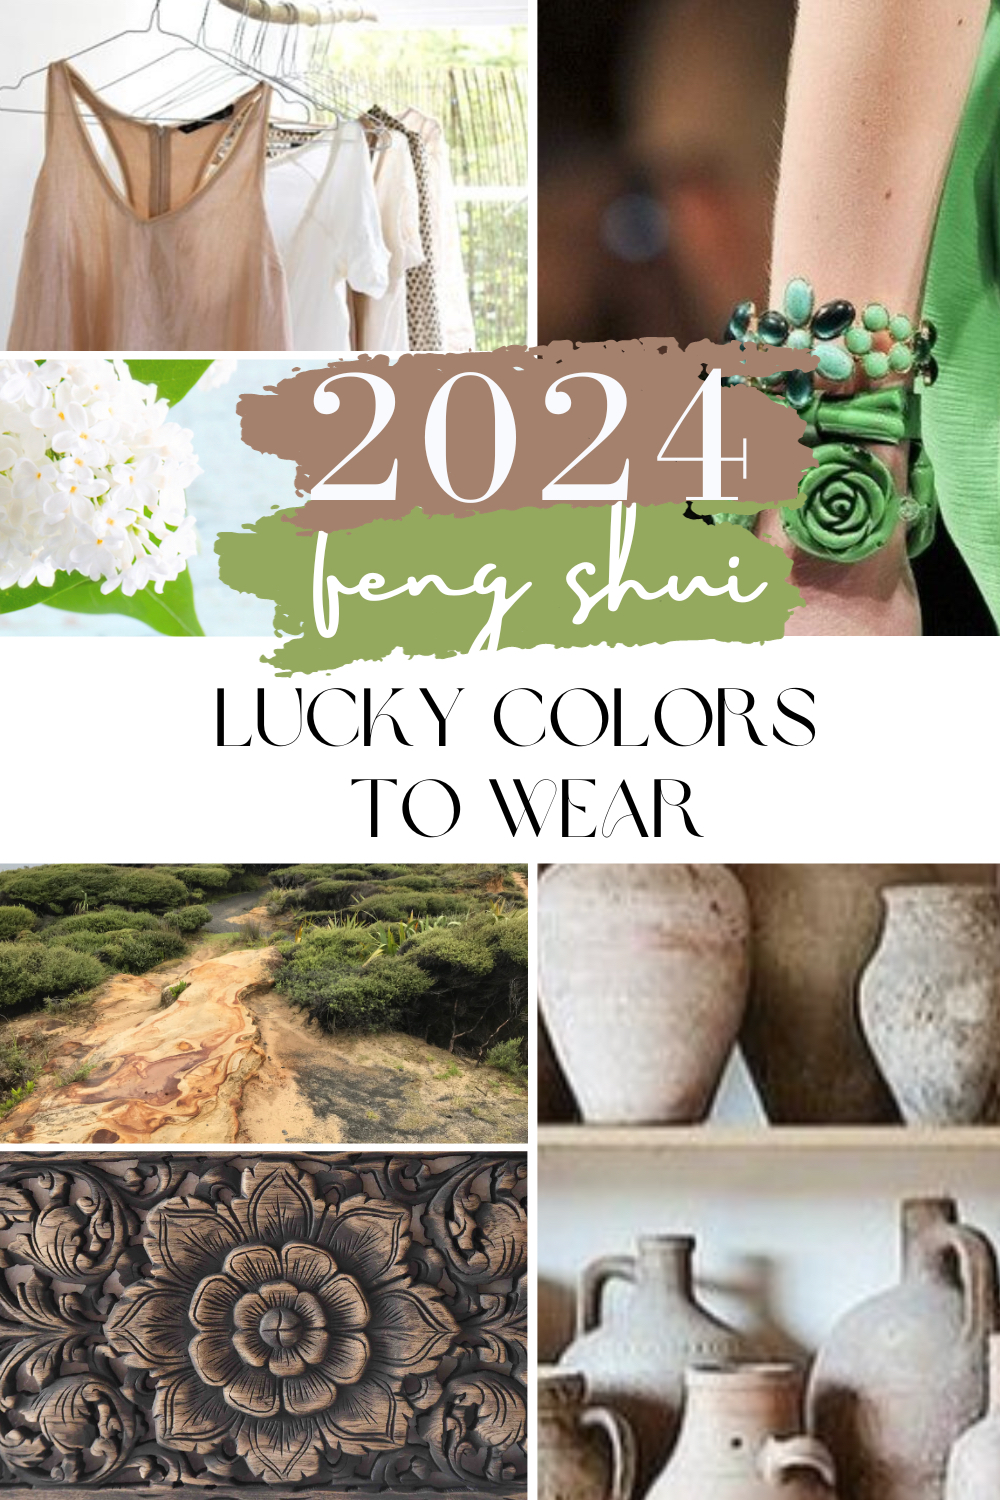 2024 feng shui lucky colors to wear